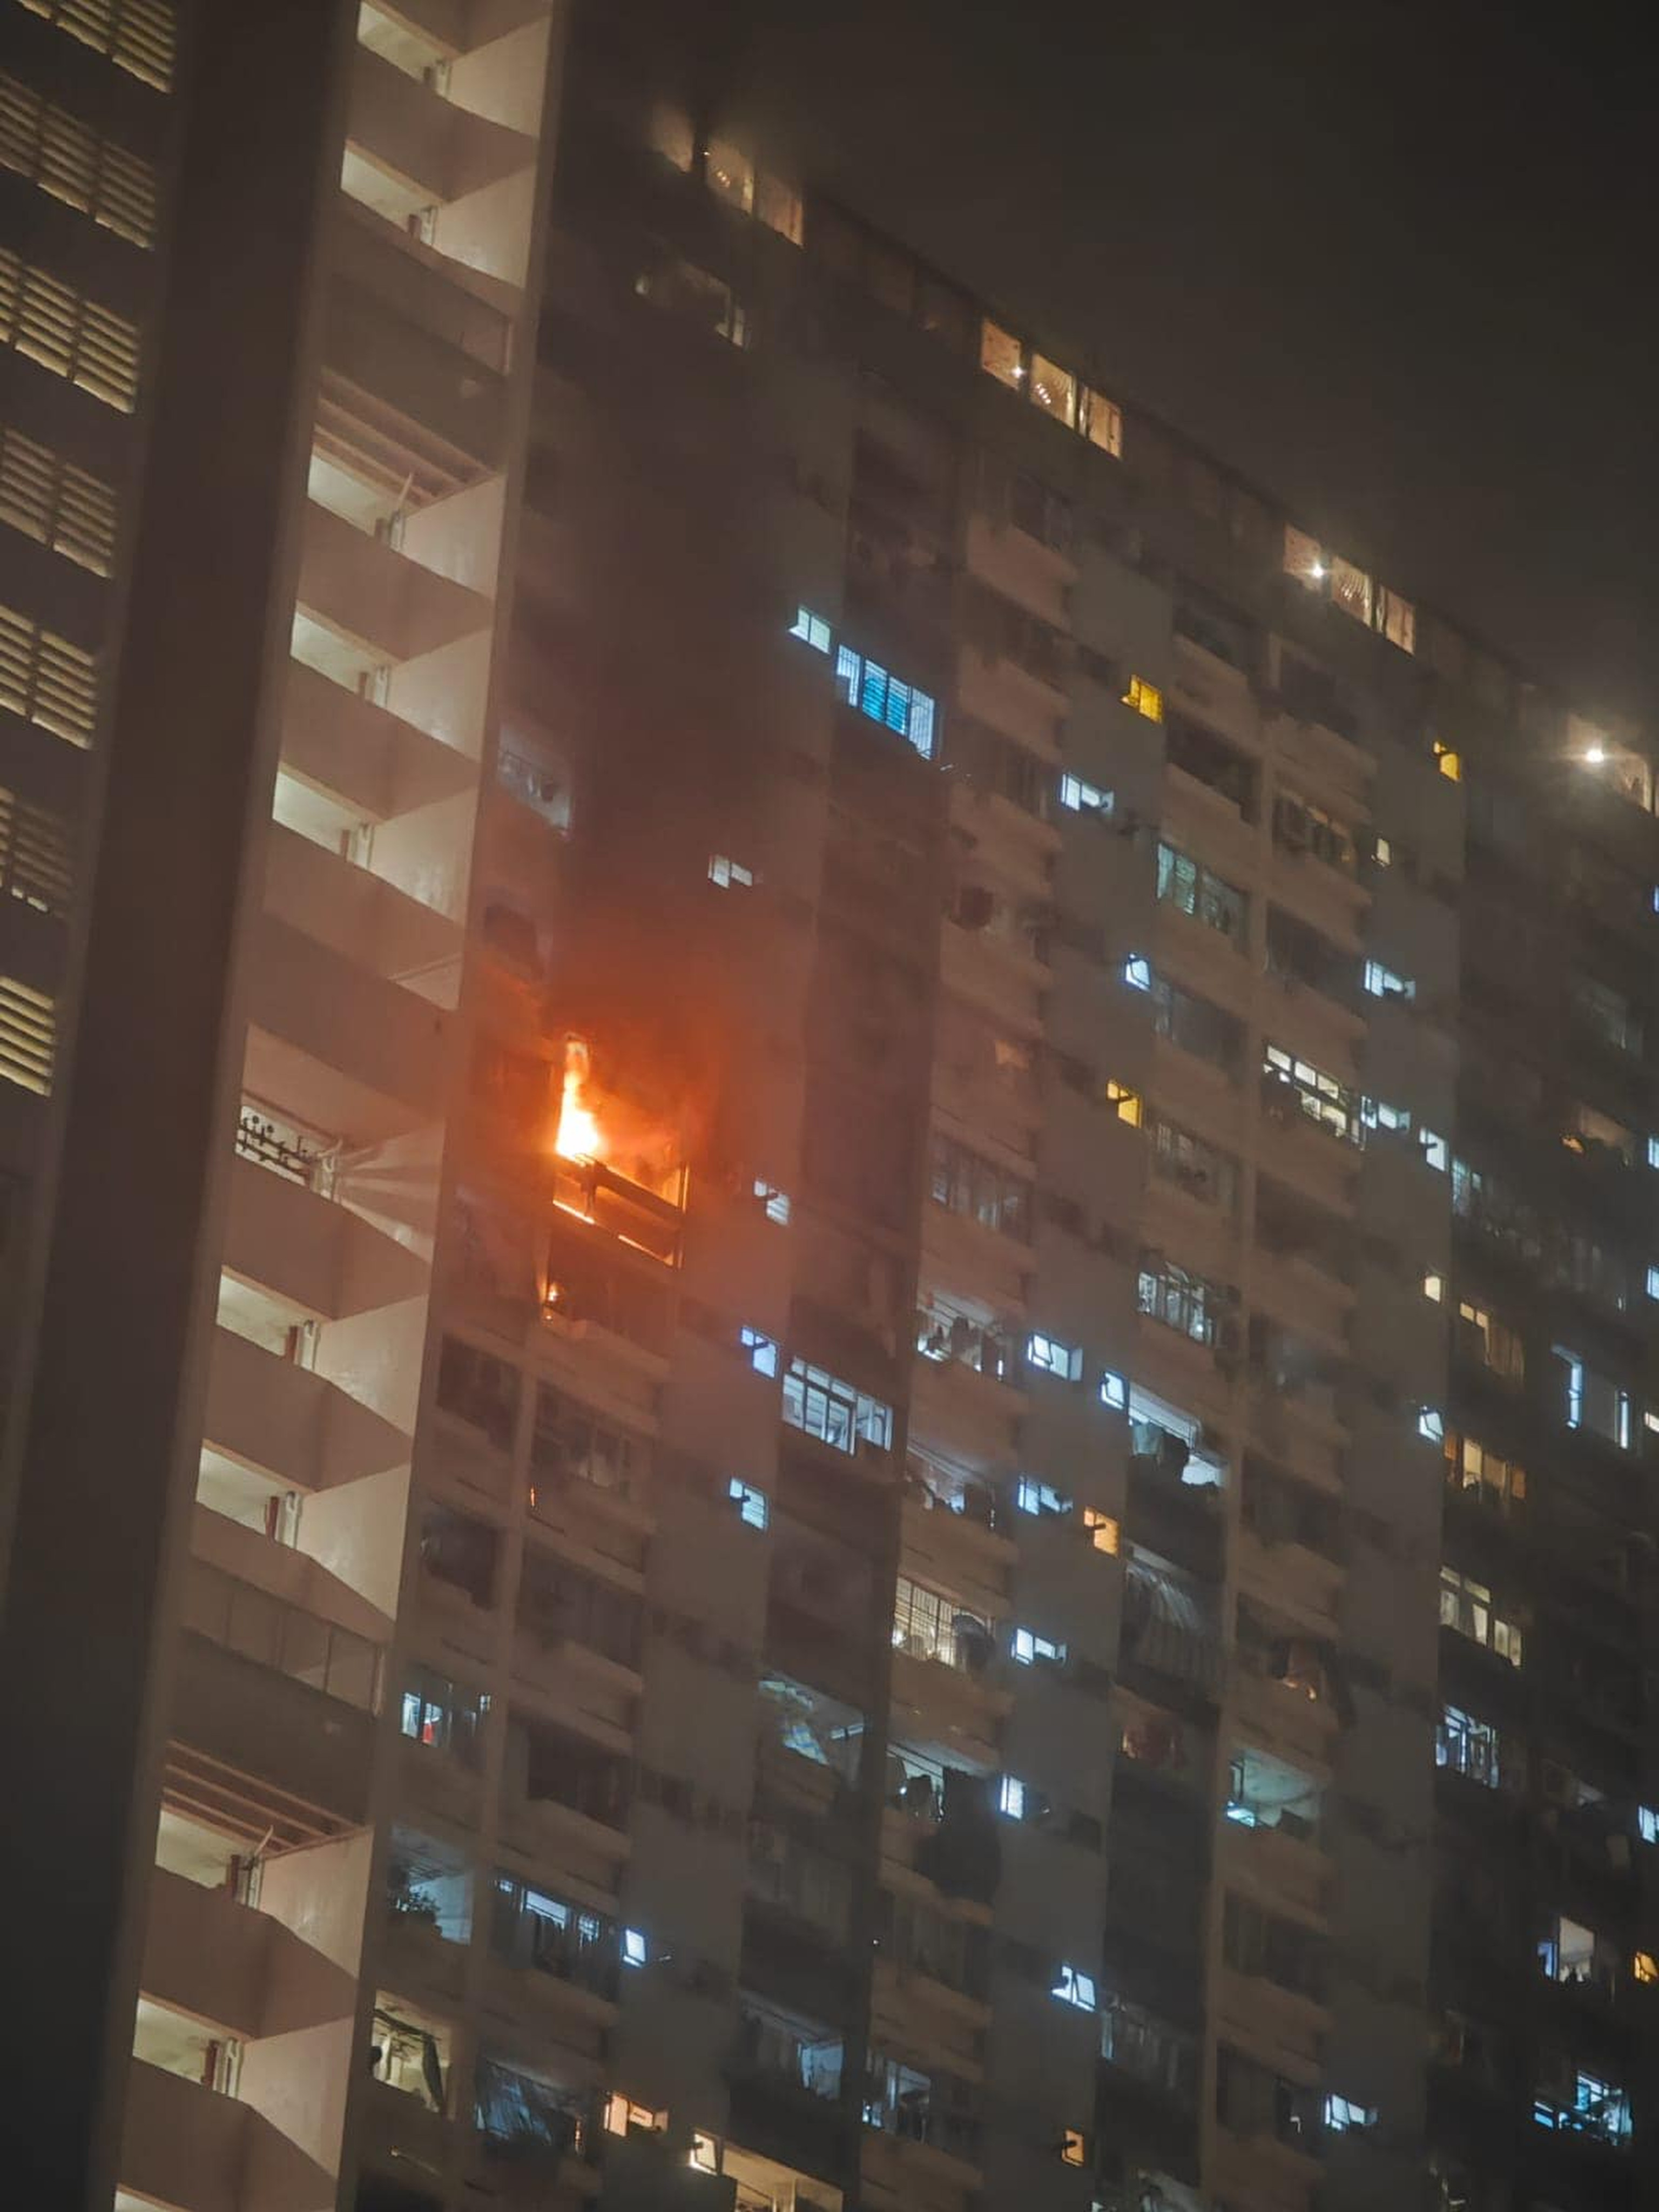 Shortly before 10pm, flames were seen shooting out the flat’s windows, accompanied by thick smoke, on the 21st floor of Tsuen Wing Lau at Lai Tak Estate in Tai Hang. Photo: Handout